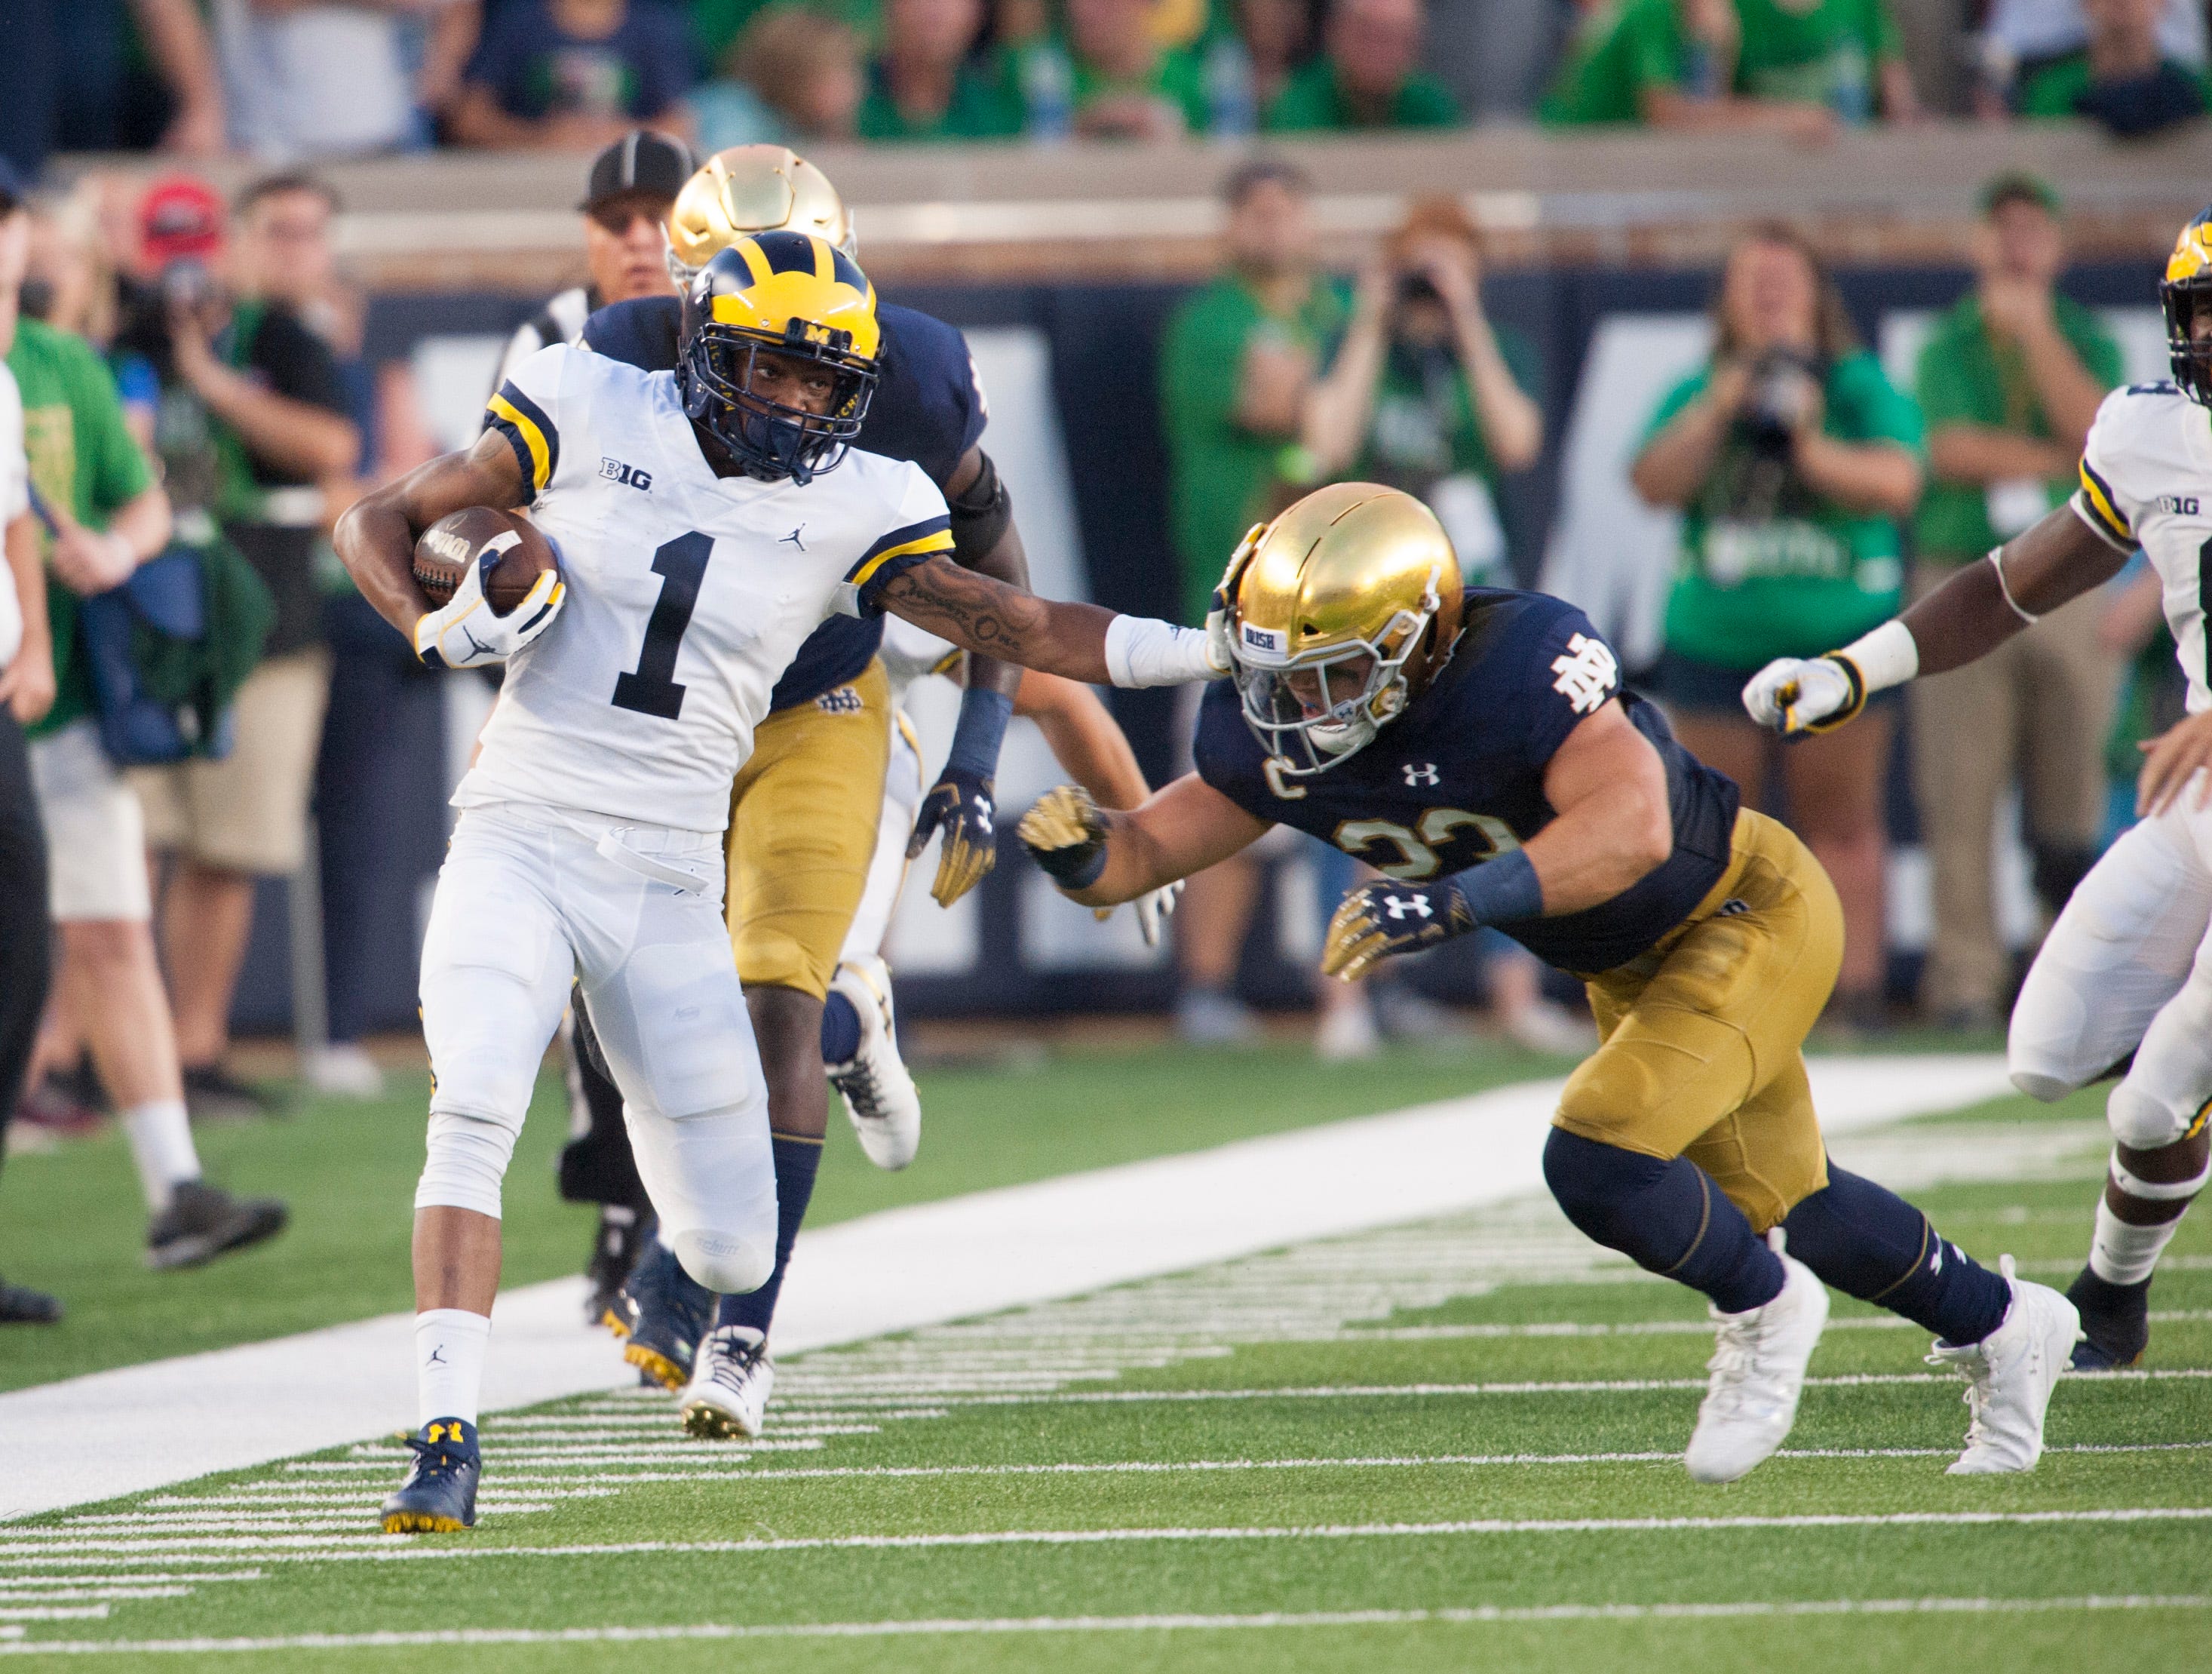 Ambry Thomas returned a kick 99 yards for a score against Notre Dame in Michigan's 2018 season opener.